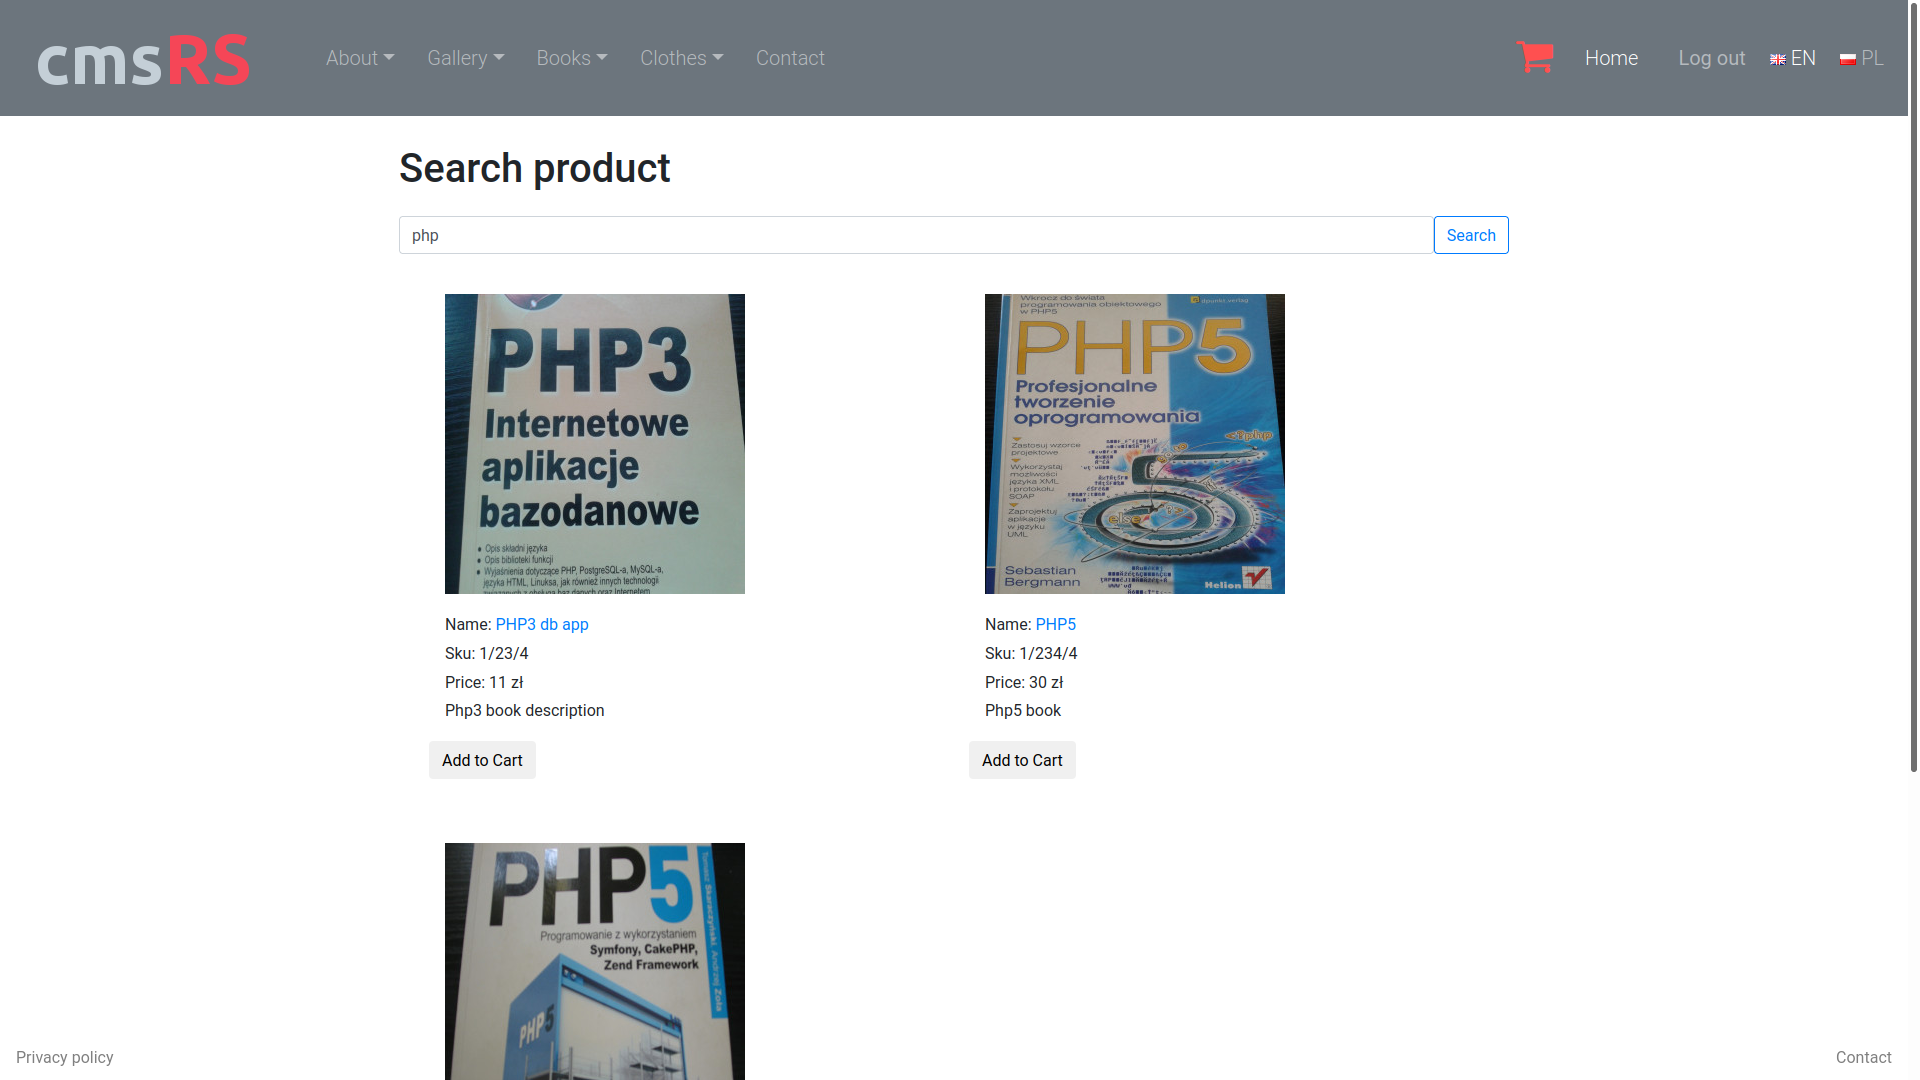 Search products